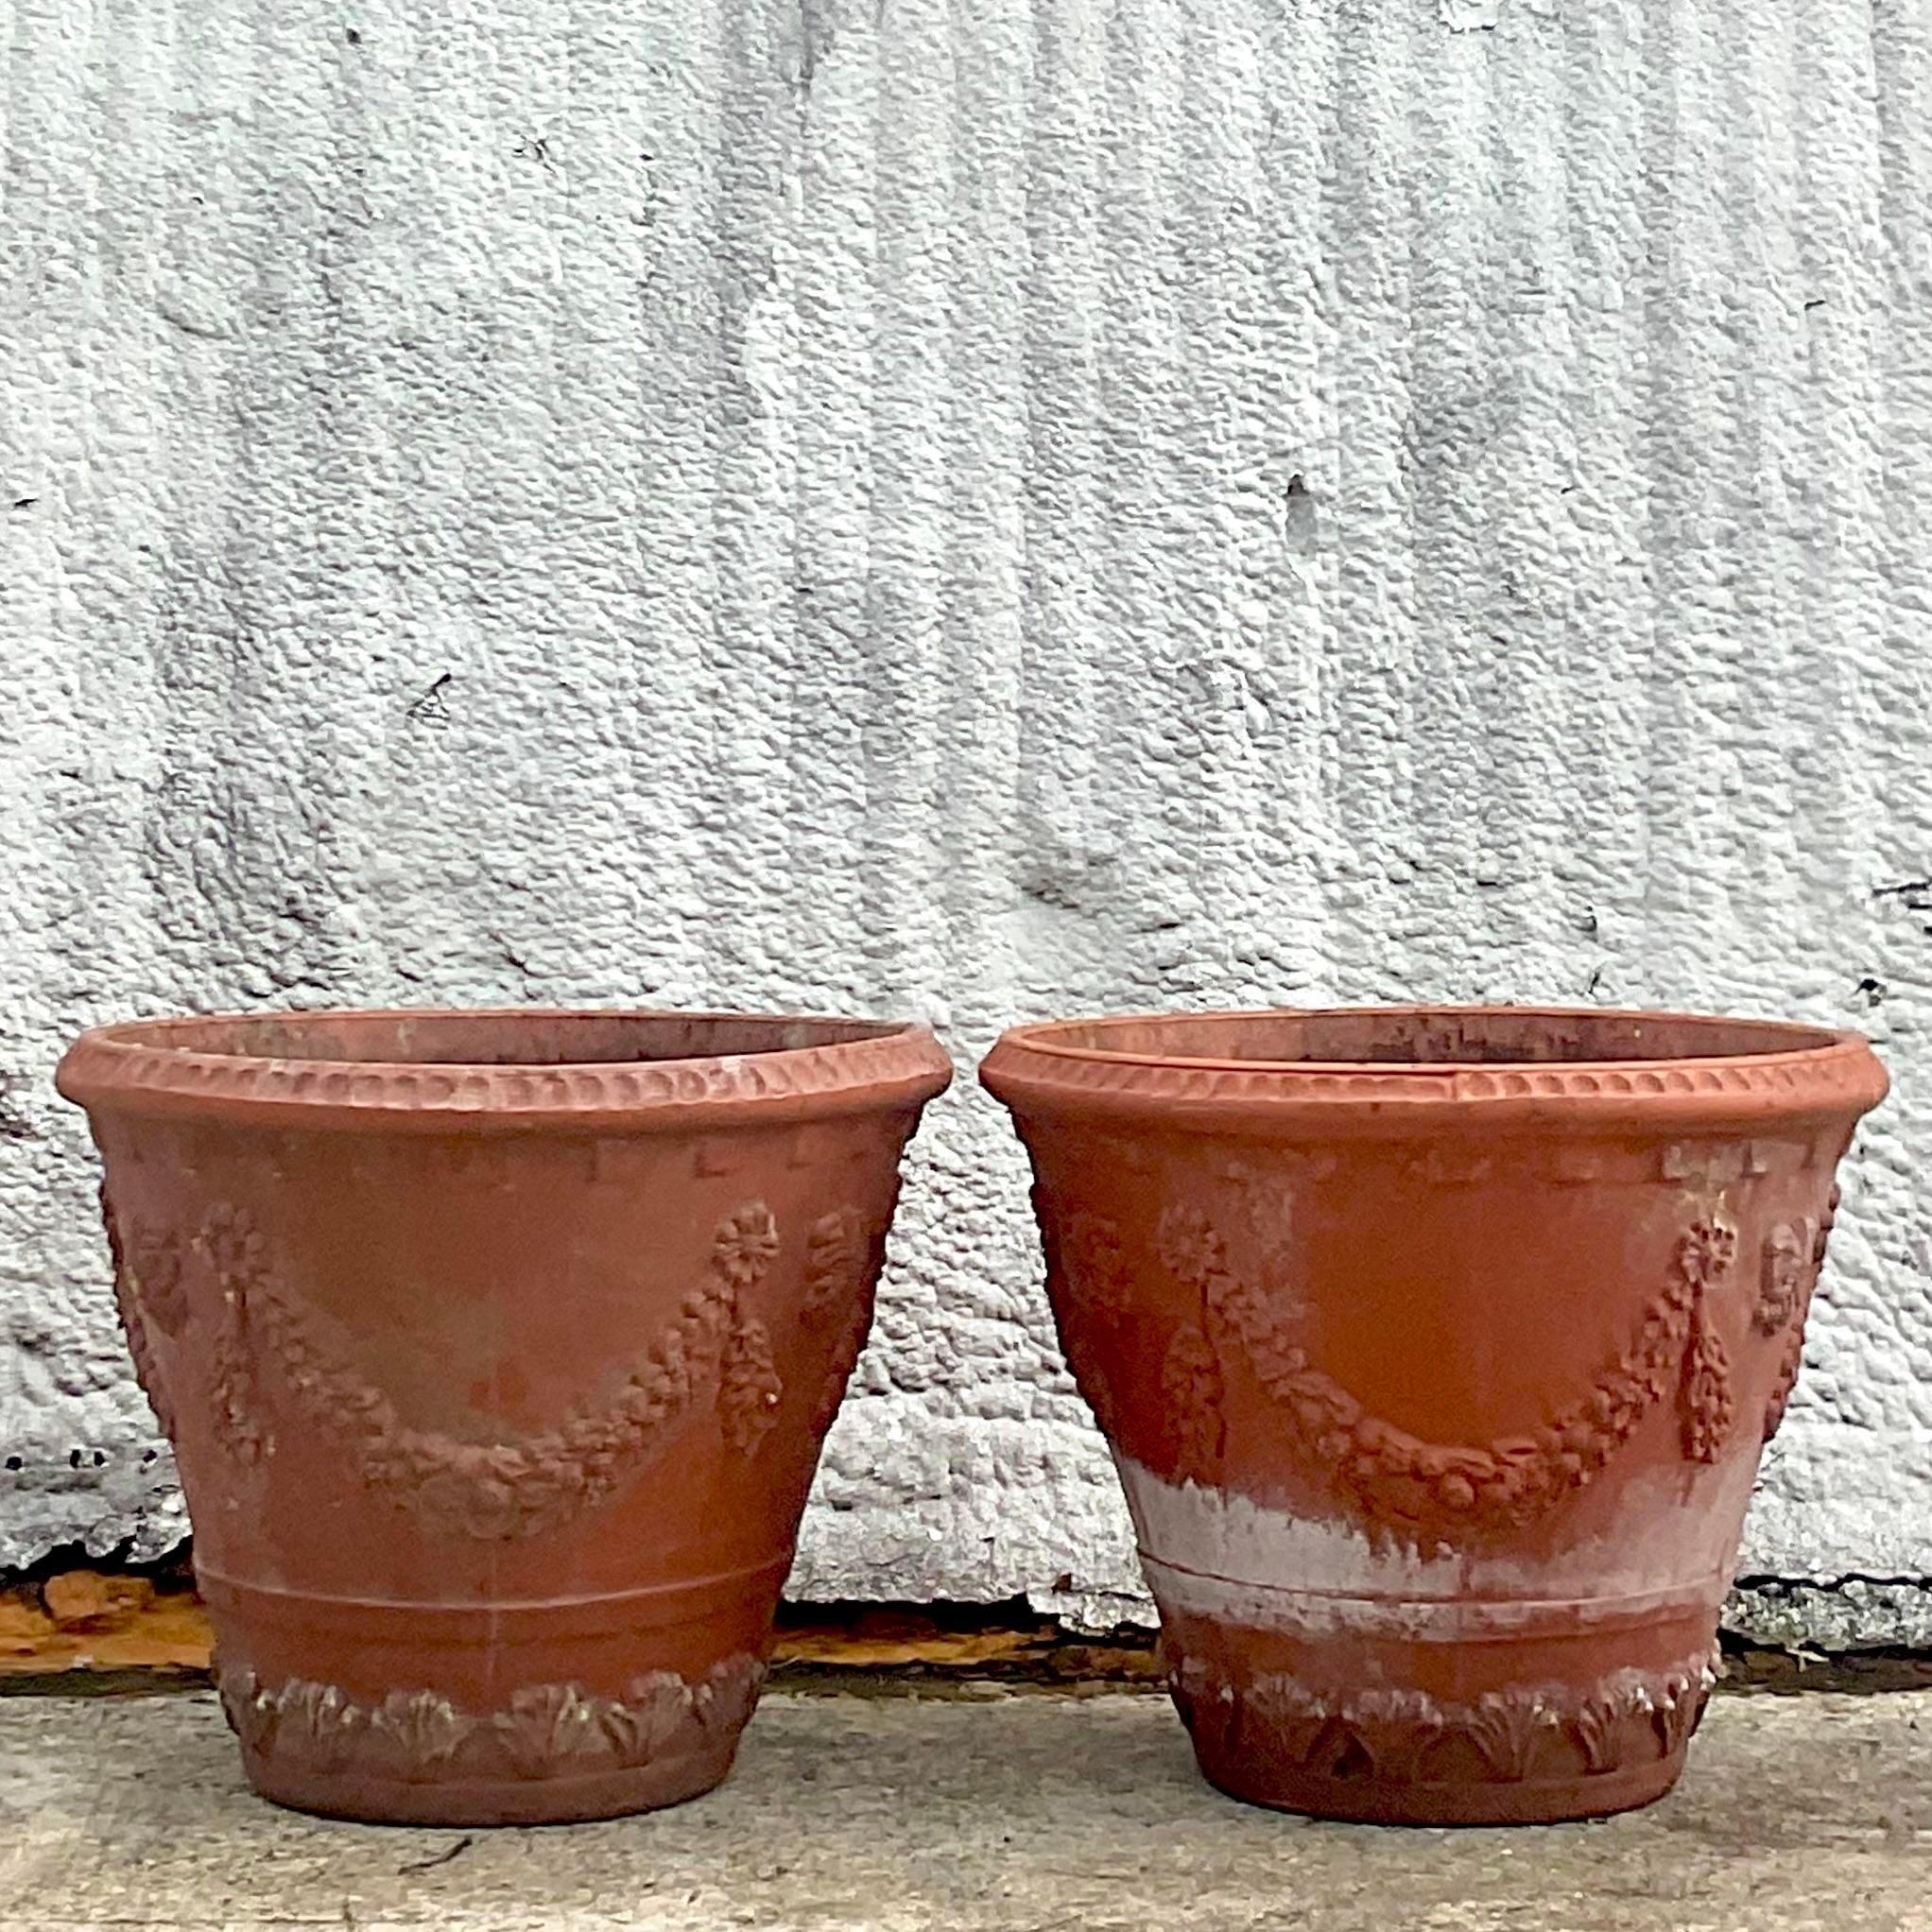 Vintage Coastal Swag Garland Terra Cotta Planters - a Pair In Good Condition For Sale In west palm beach, FL